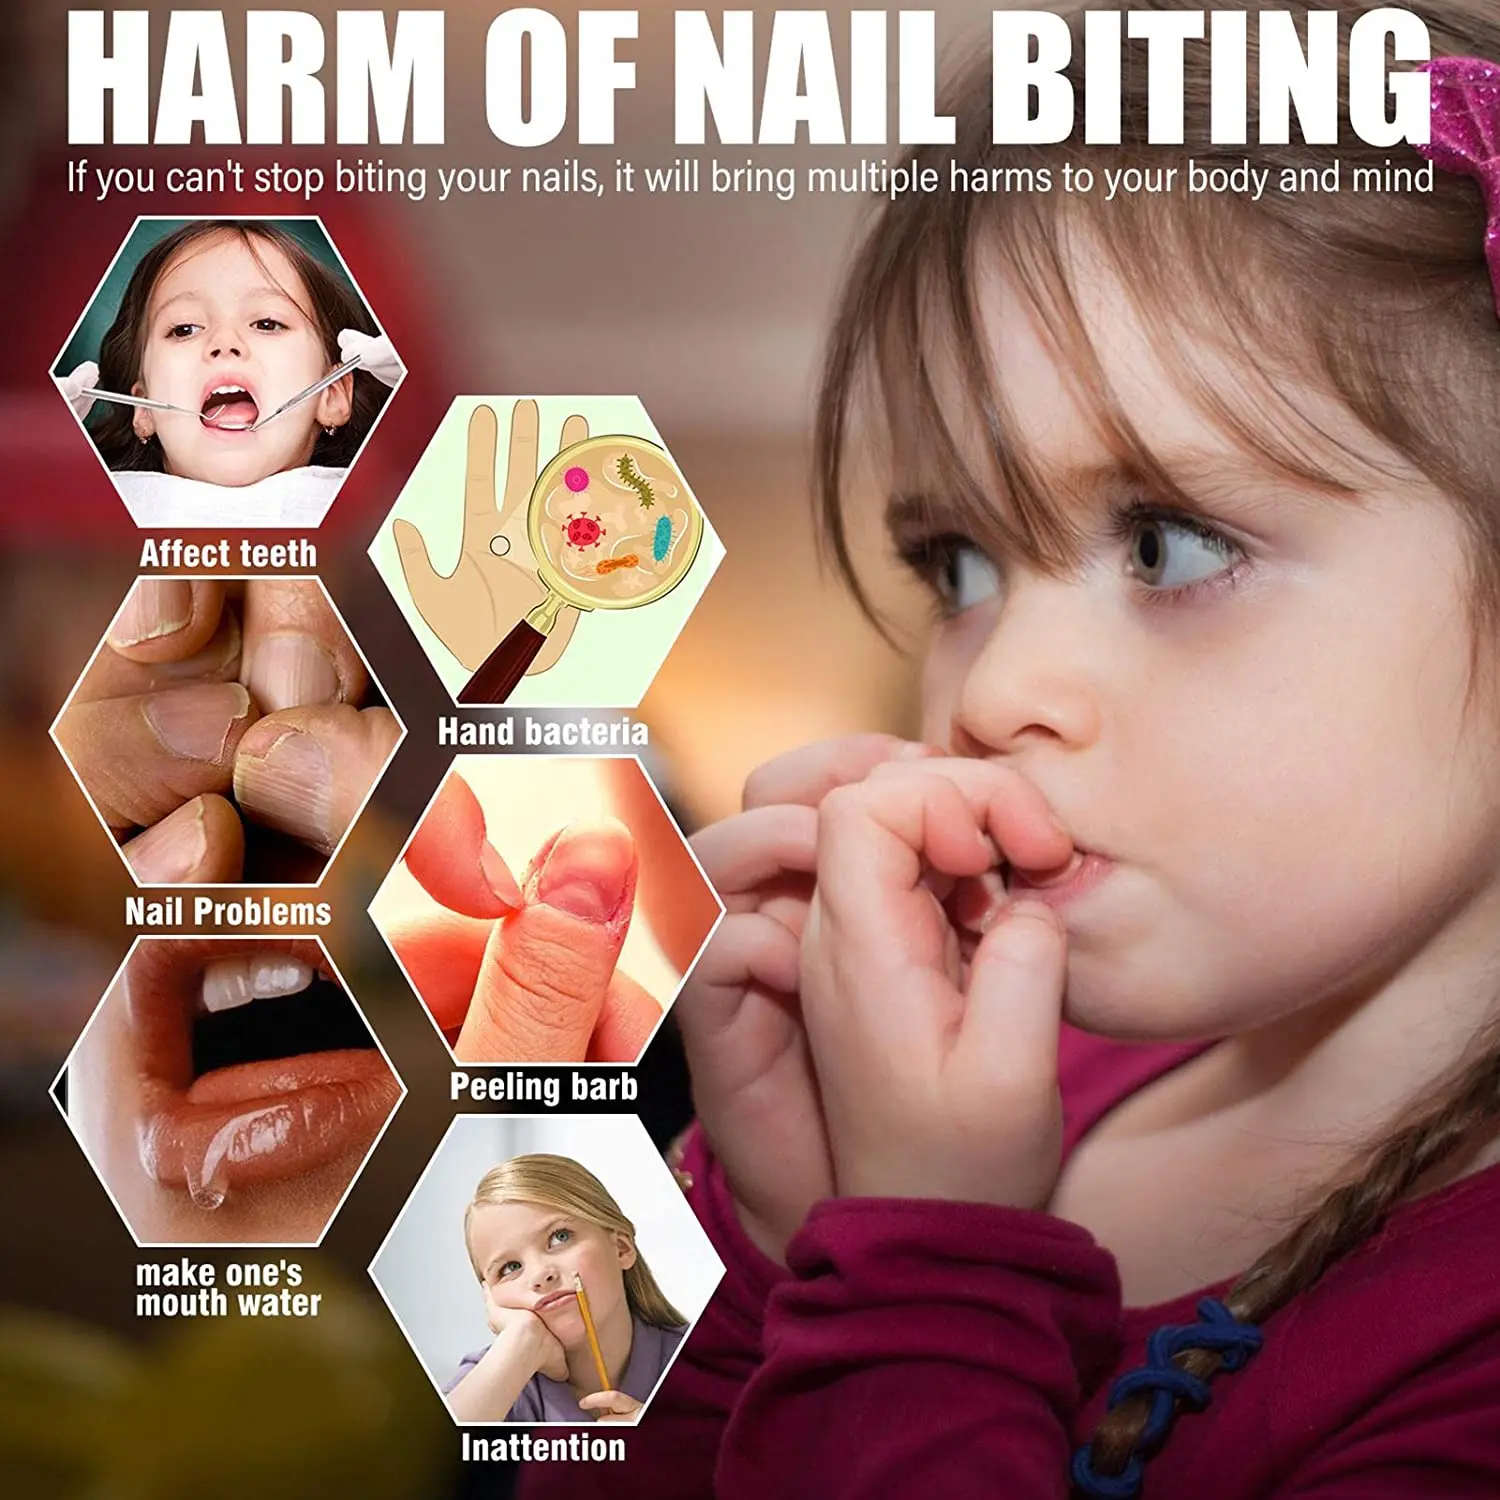 How To Stop Your Children From Biting Their Nails? | Nail biting remedies,  Nails for kids, Nails